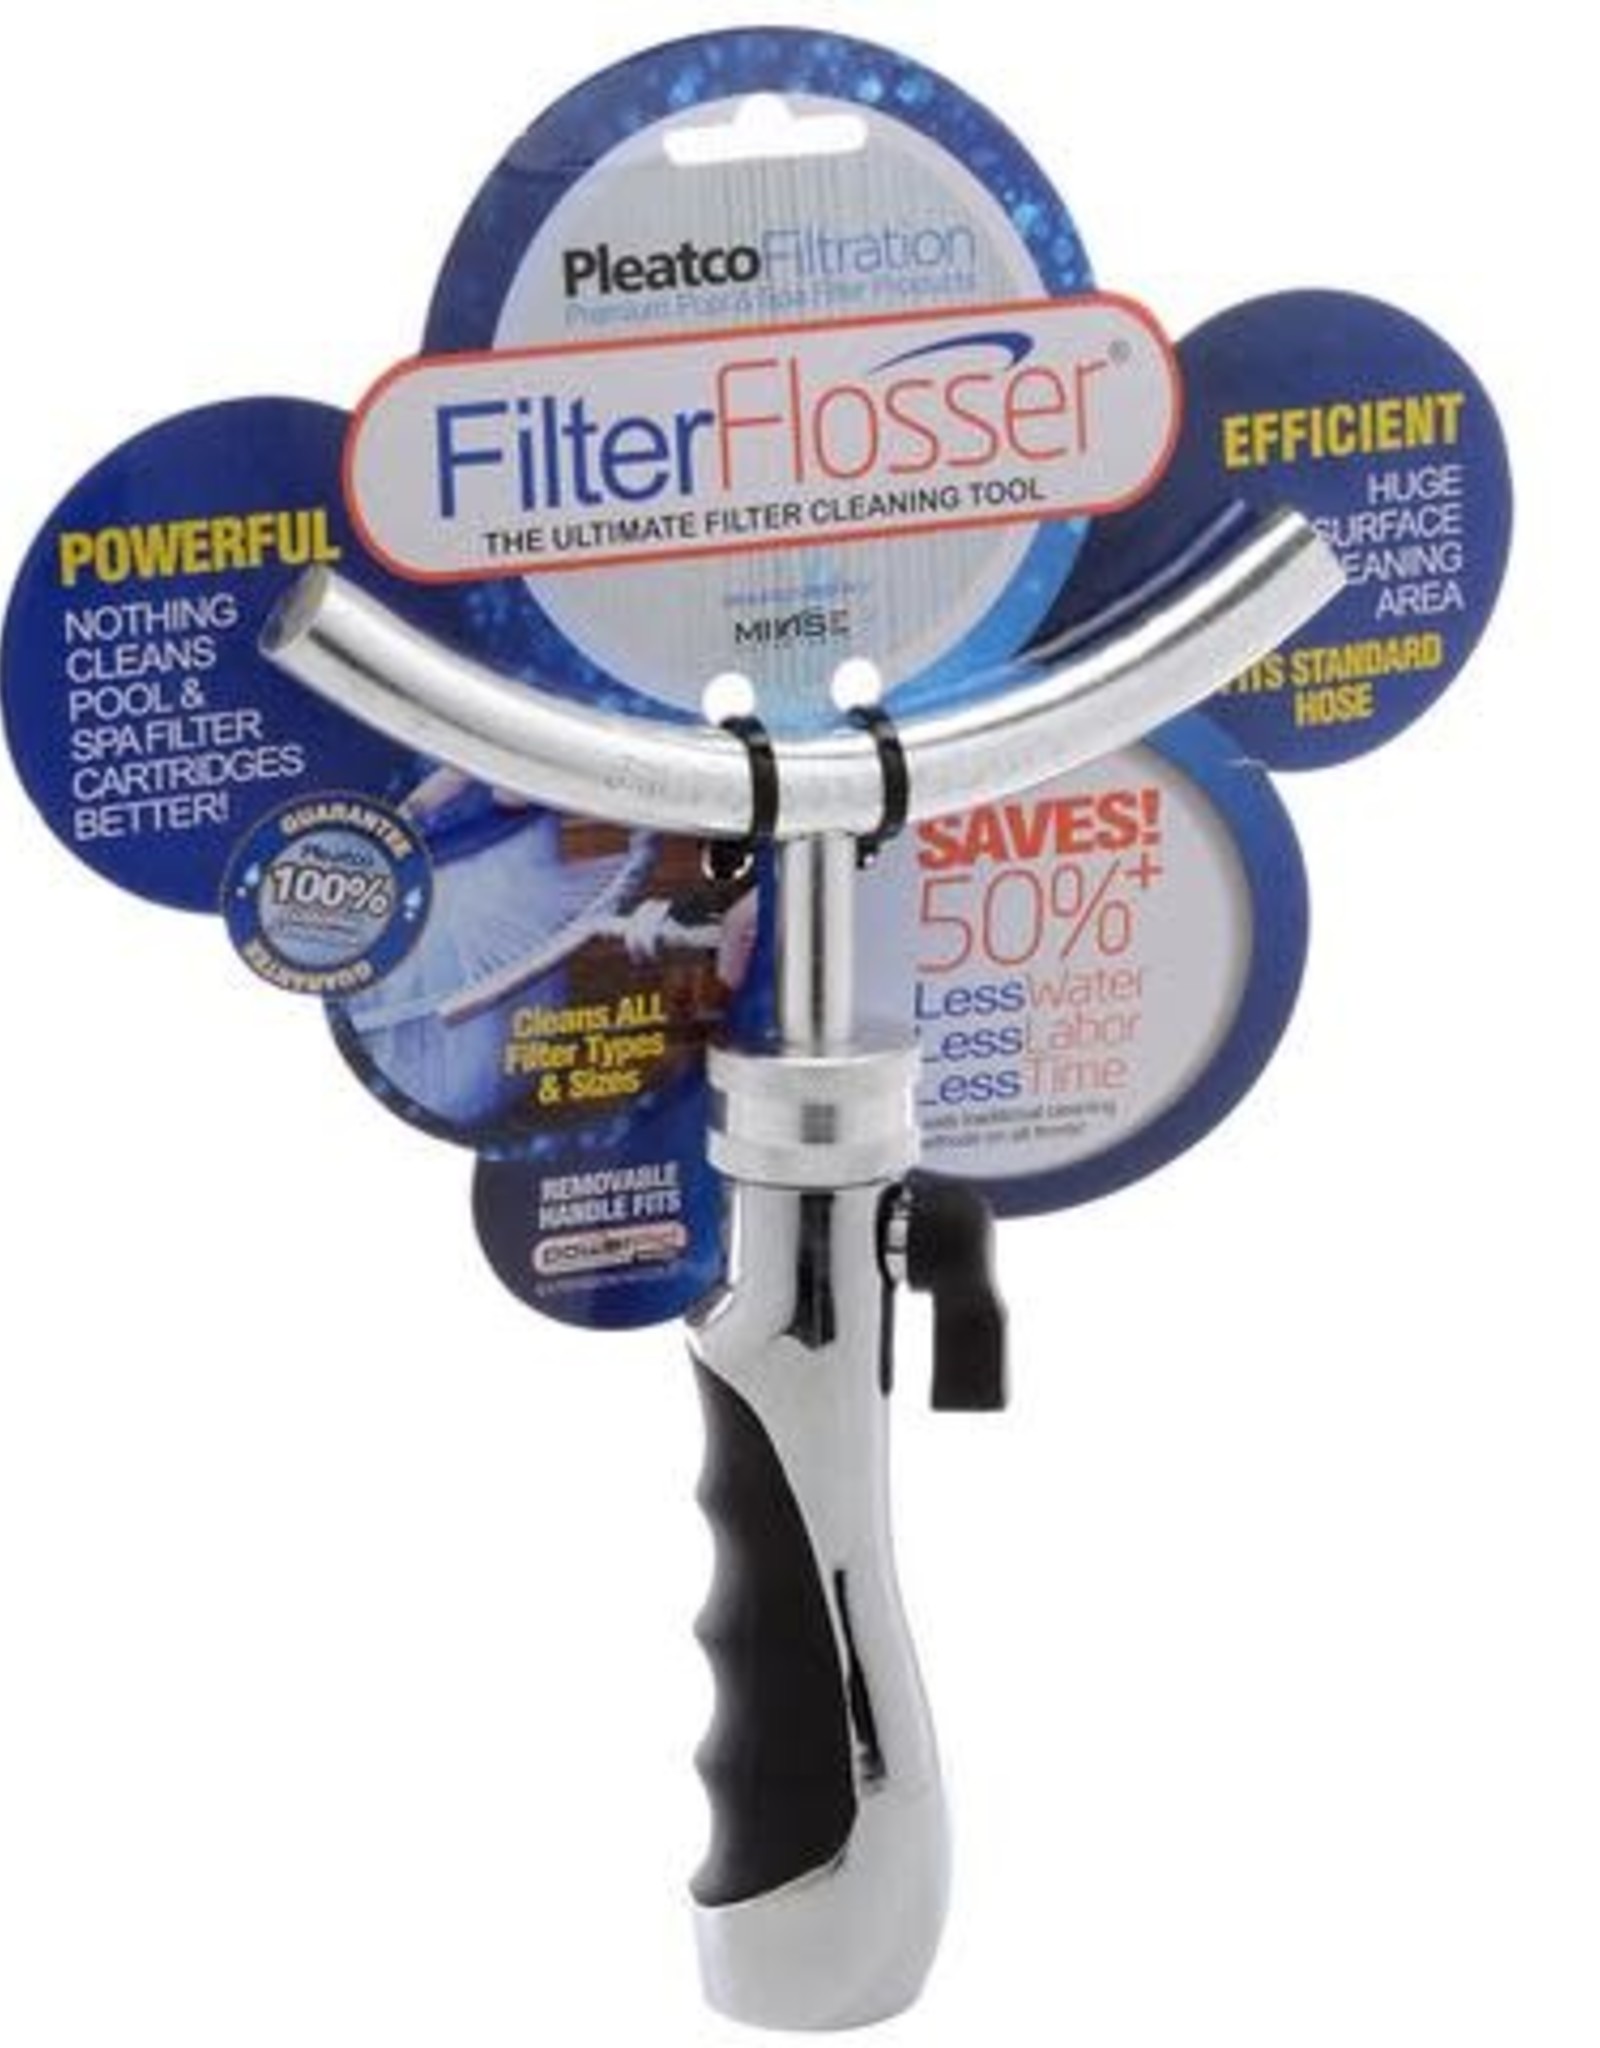 FILTER FLOSSER ( the ultimate filter cleaning tool )